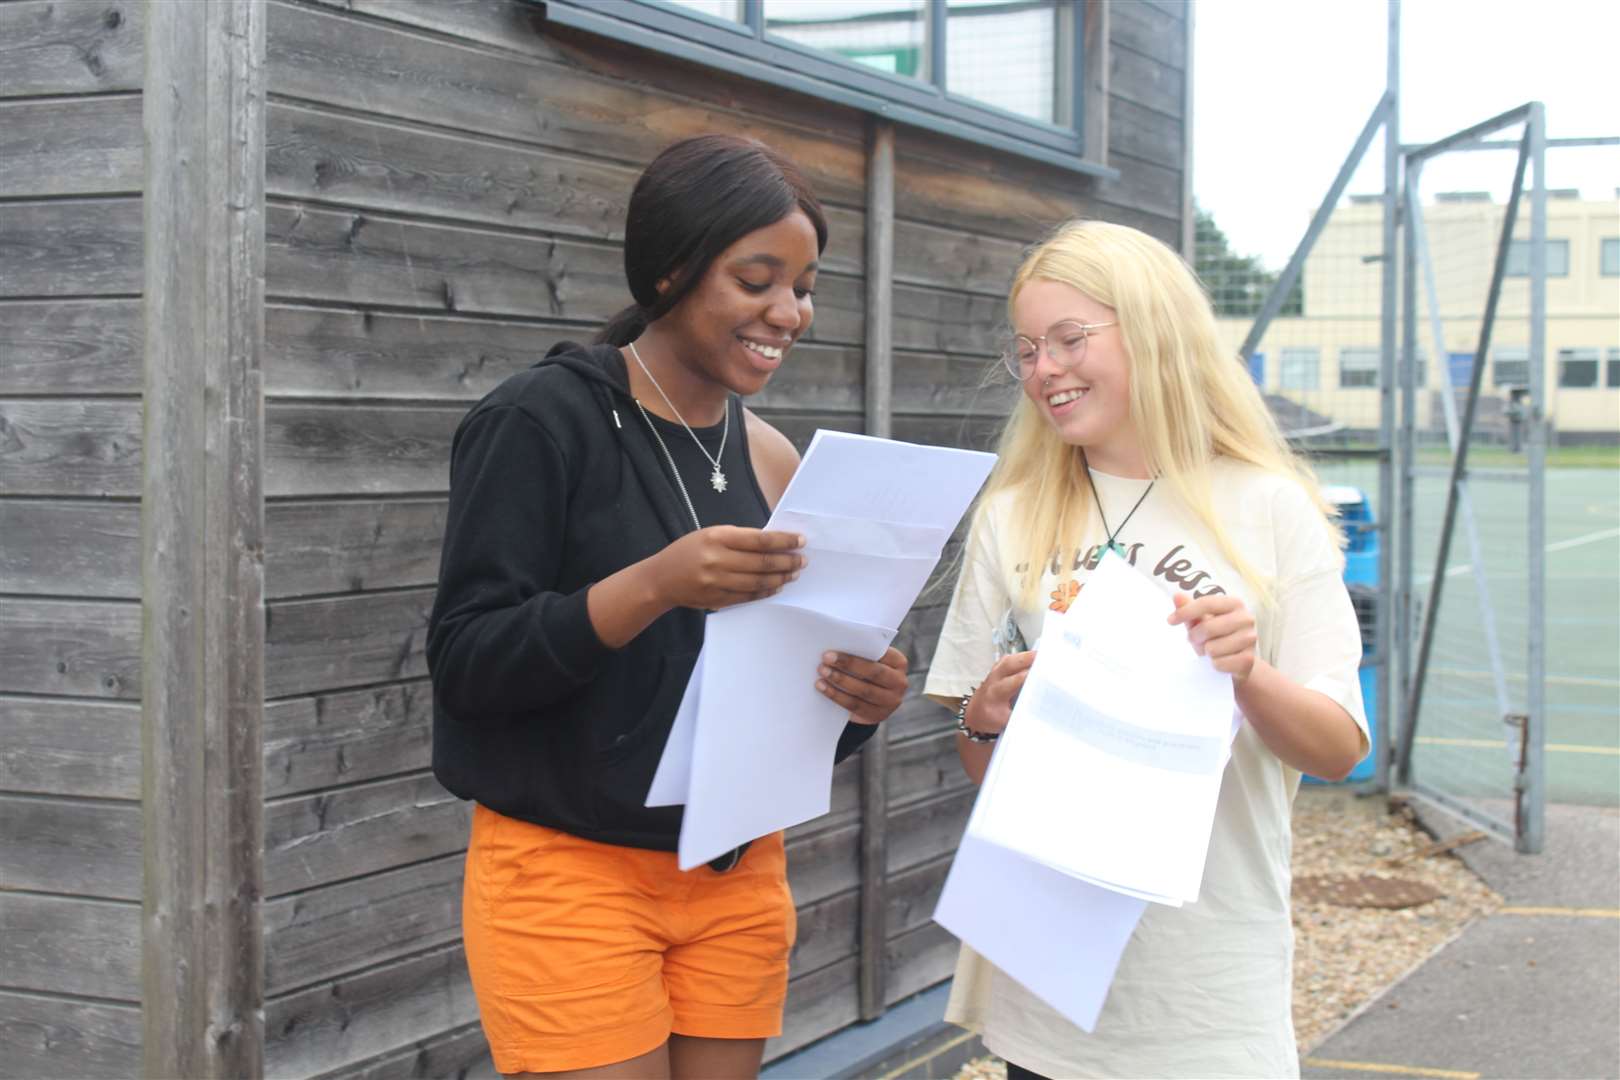 Pupils from Sittingbourne's Highsted Grammar School for Girls compare GCSE results on Thursday